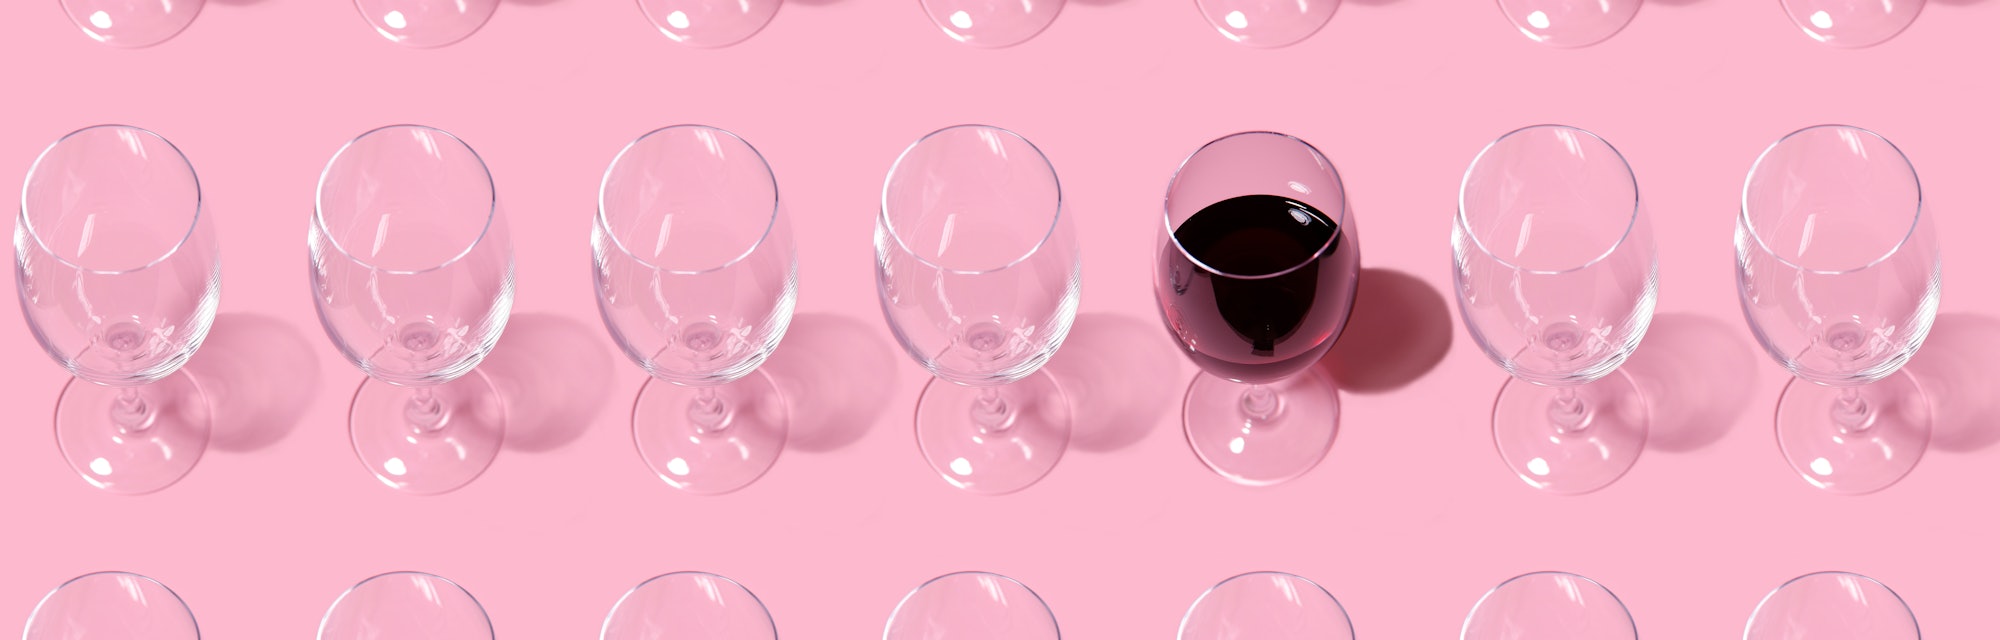 Glass pattern. Repeating empty wine glass on pink background.One glass filled with wine. Abstract ba...